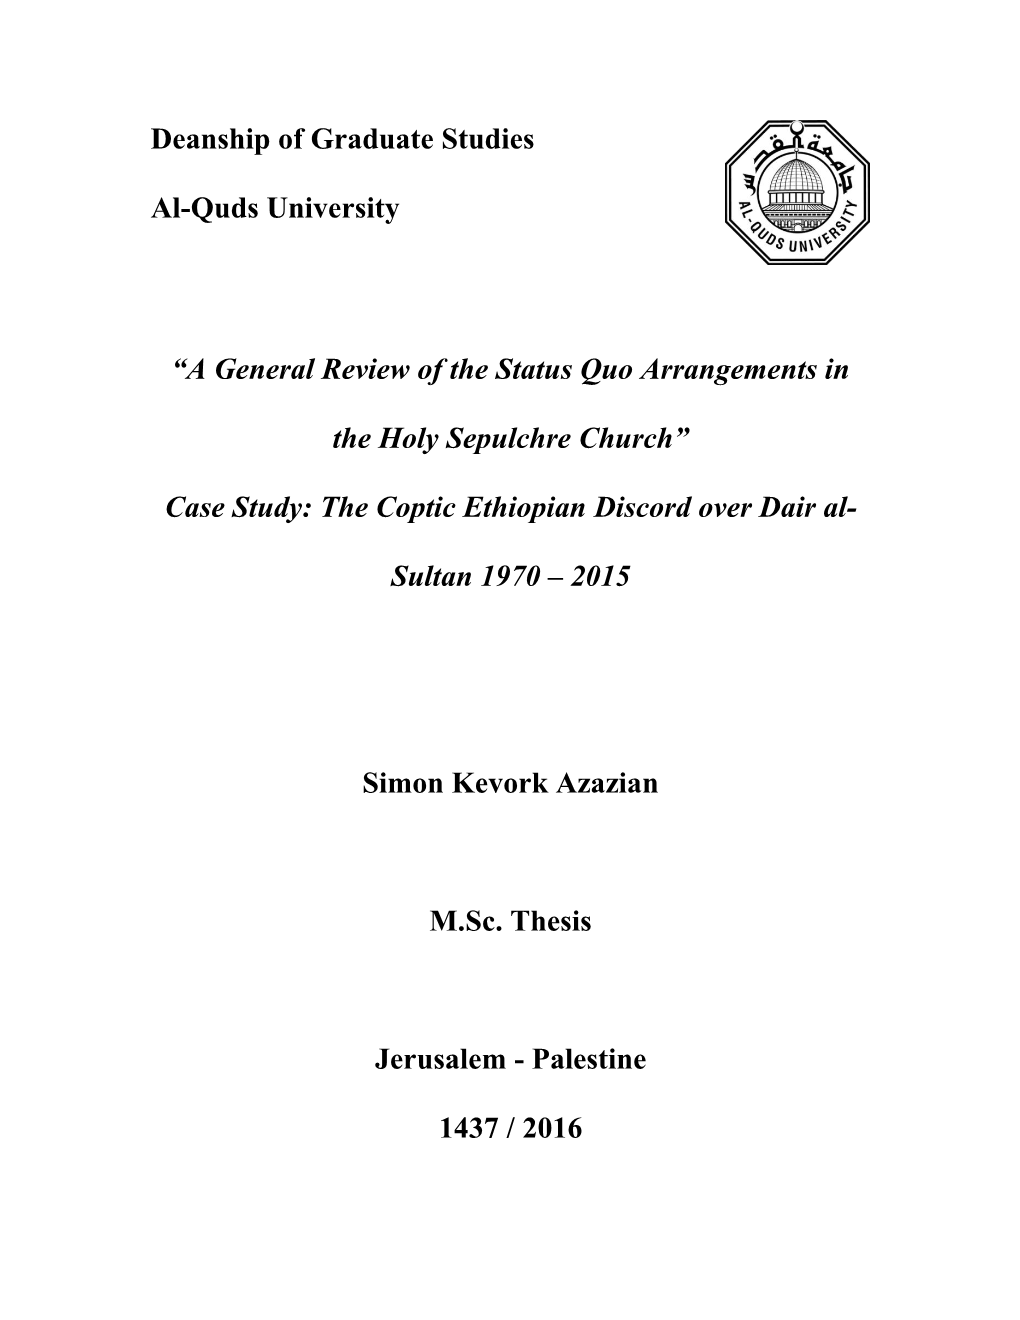 A General Review of the Status Quo Arrangements In